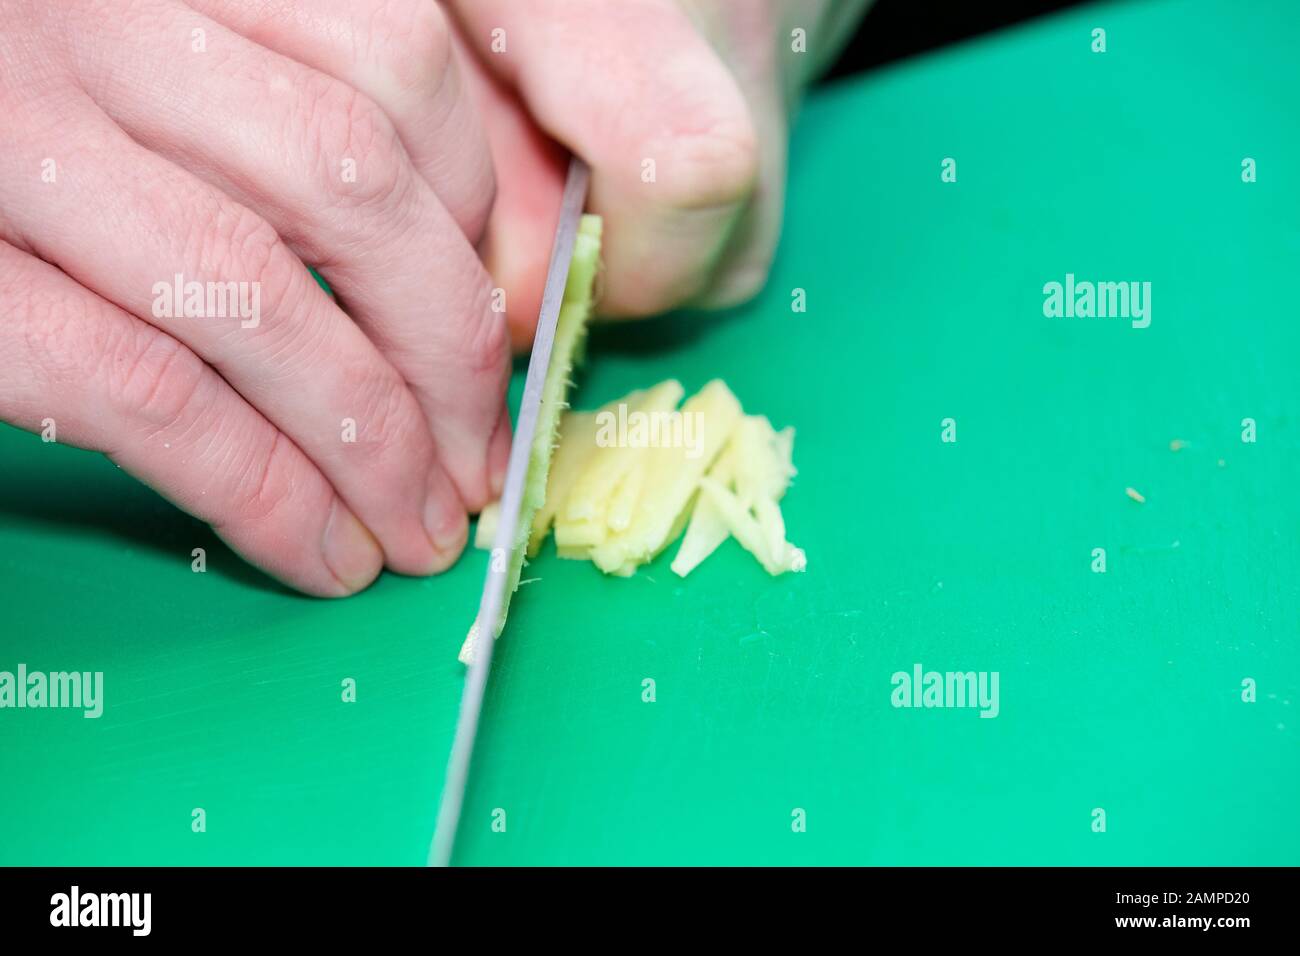 Close-up of a chef slicing ginger on a green chopping board. Stock Photo